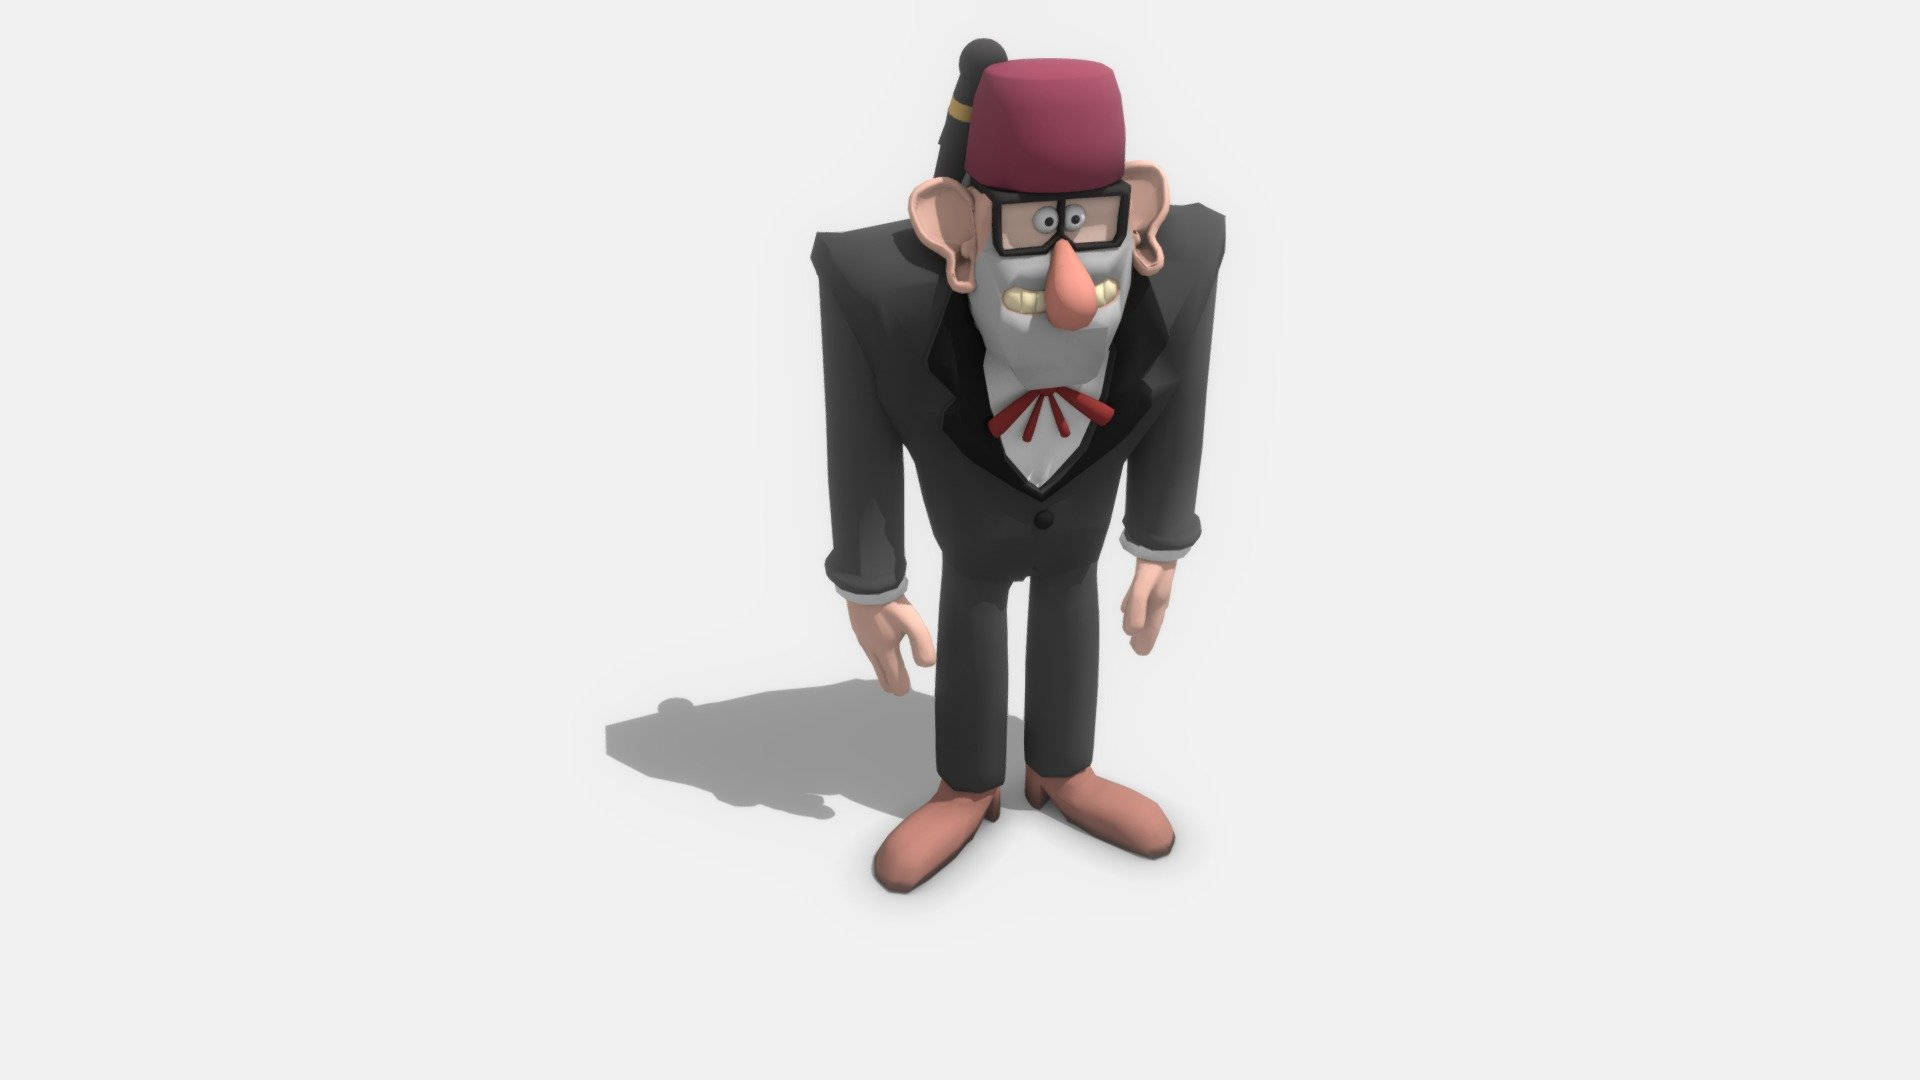 Grunkle Stan 3d In White Background